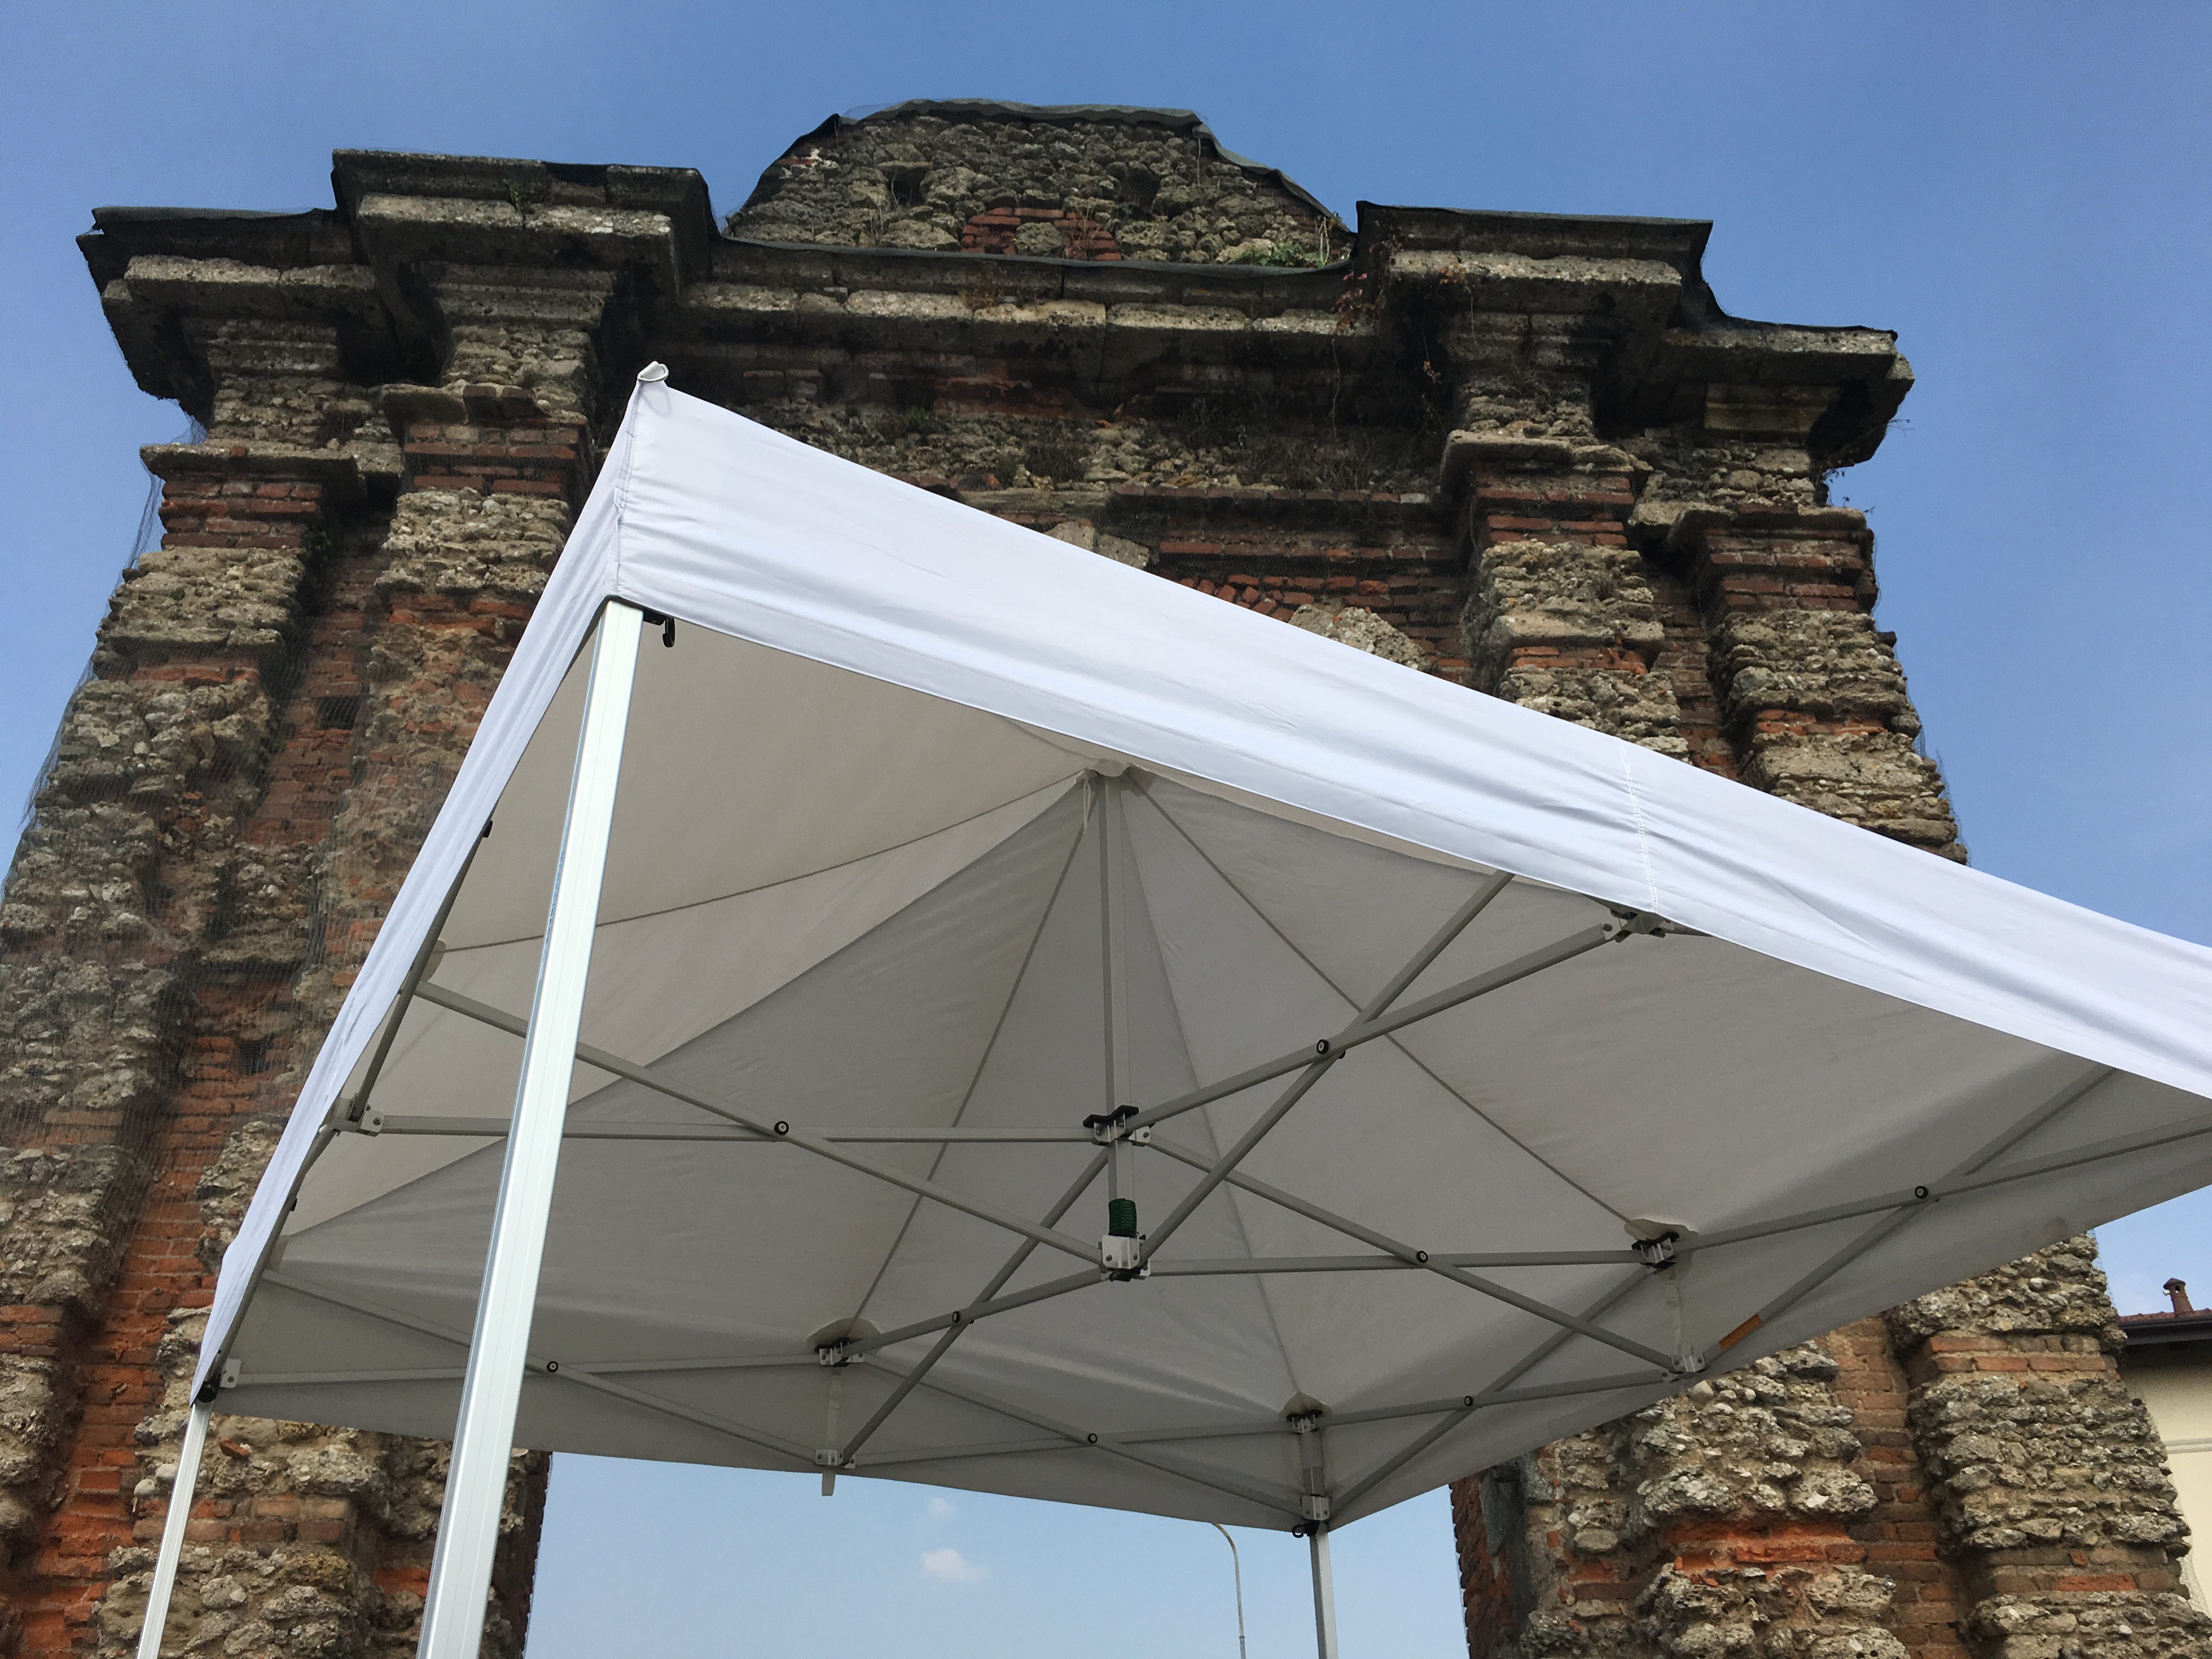 professional extra-resistant gazebo suitable for any eventuality